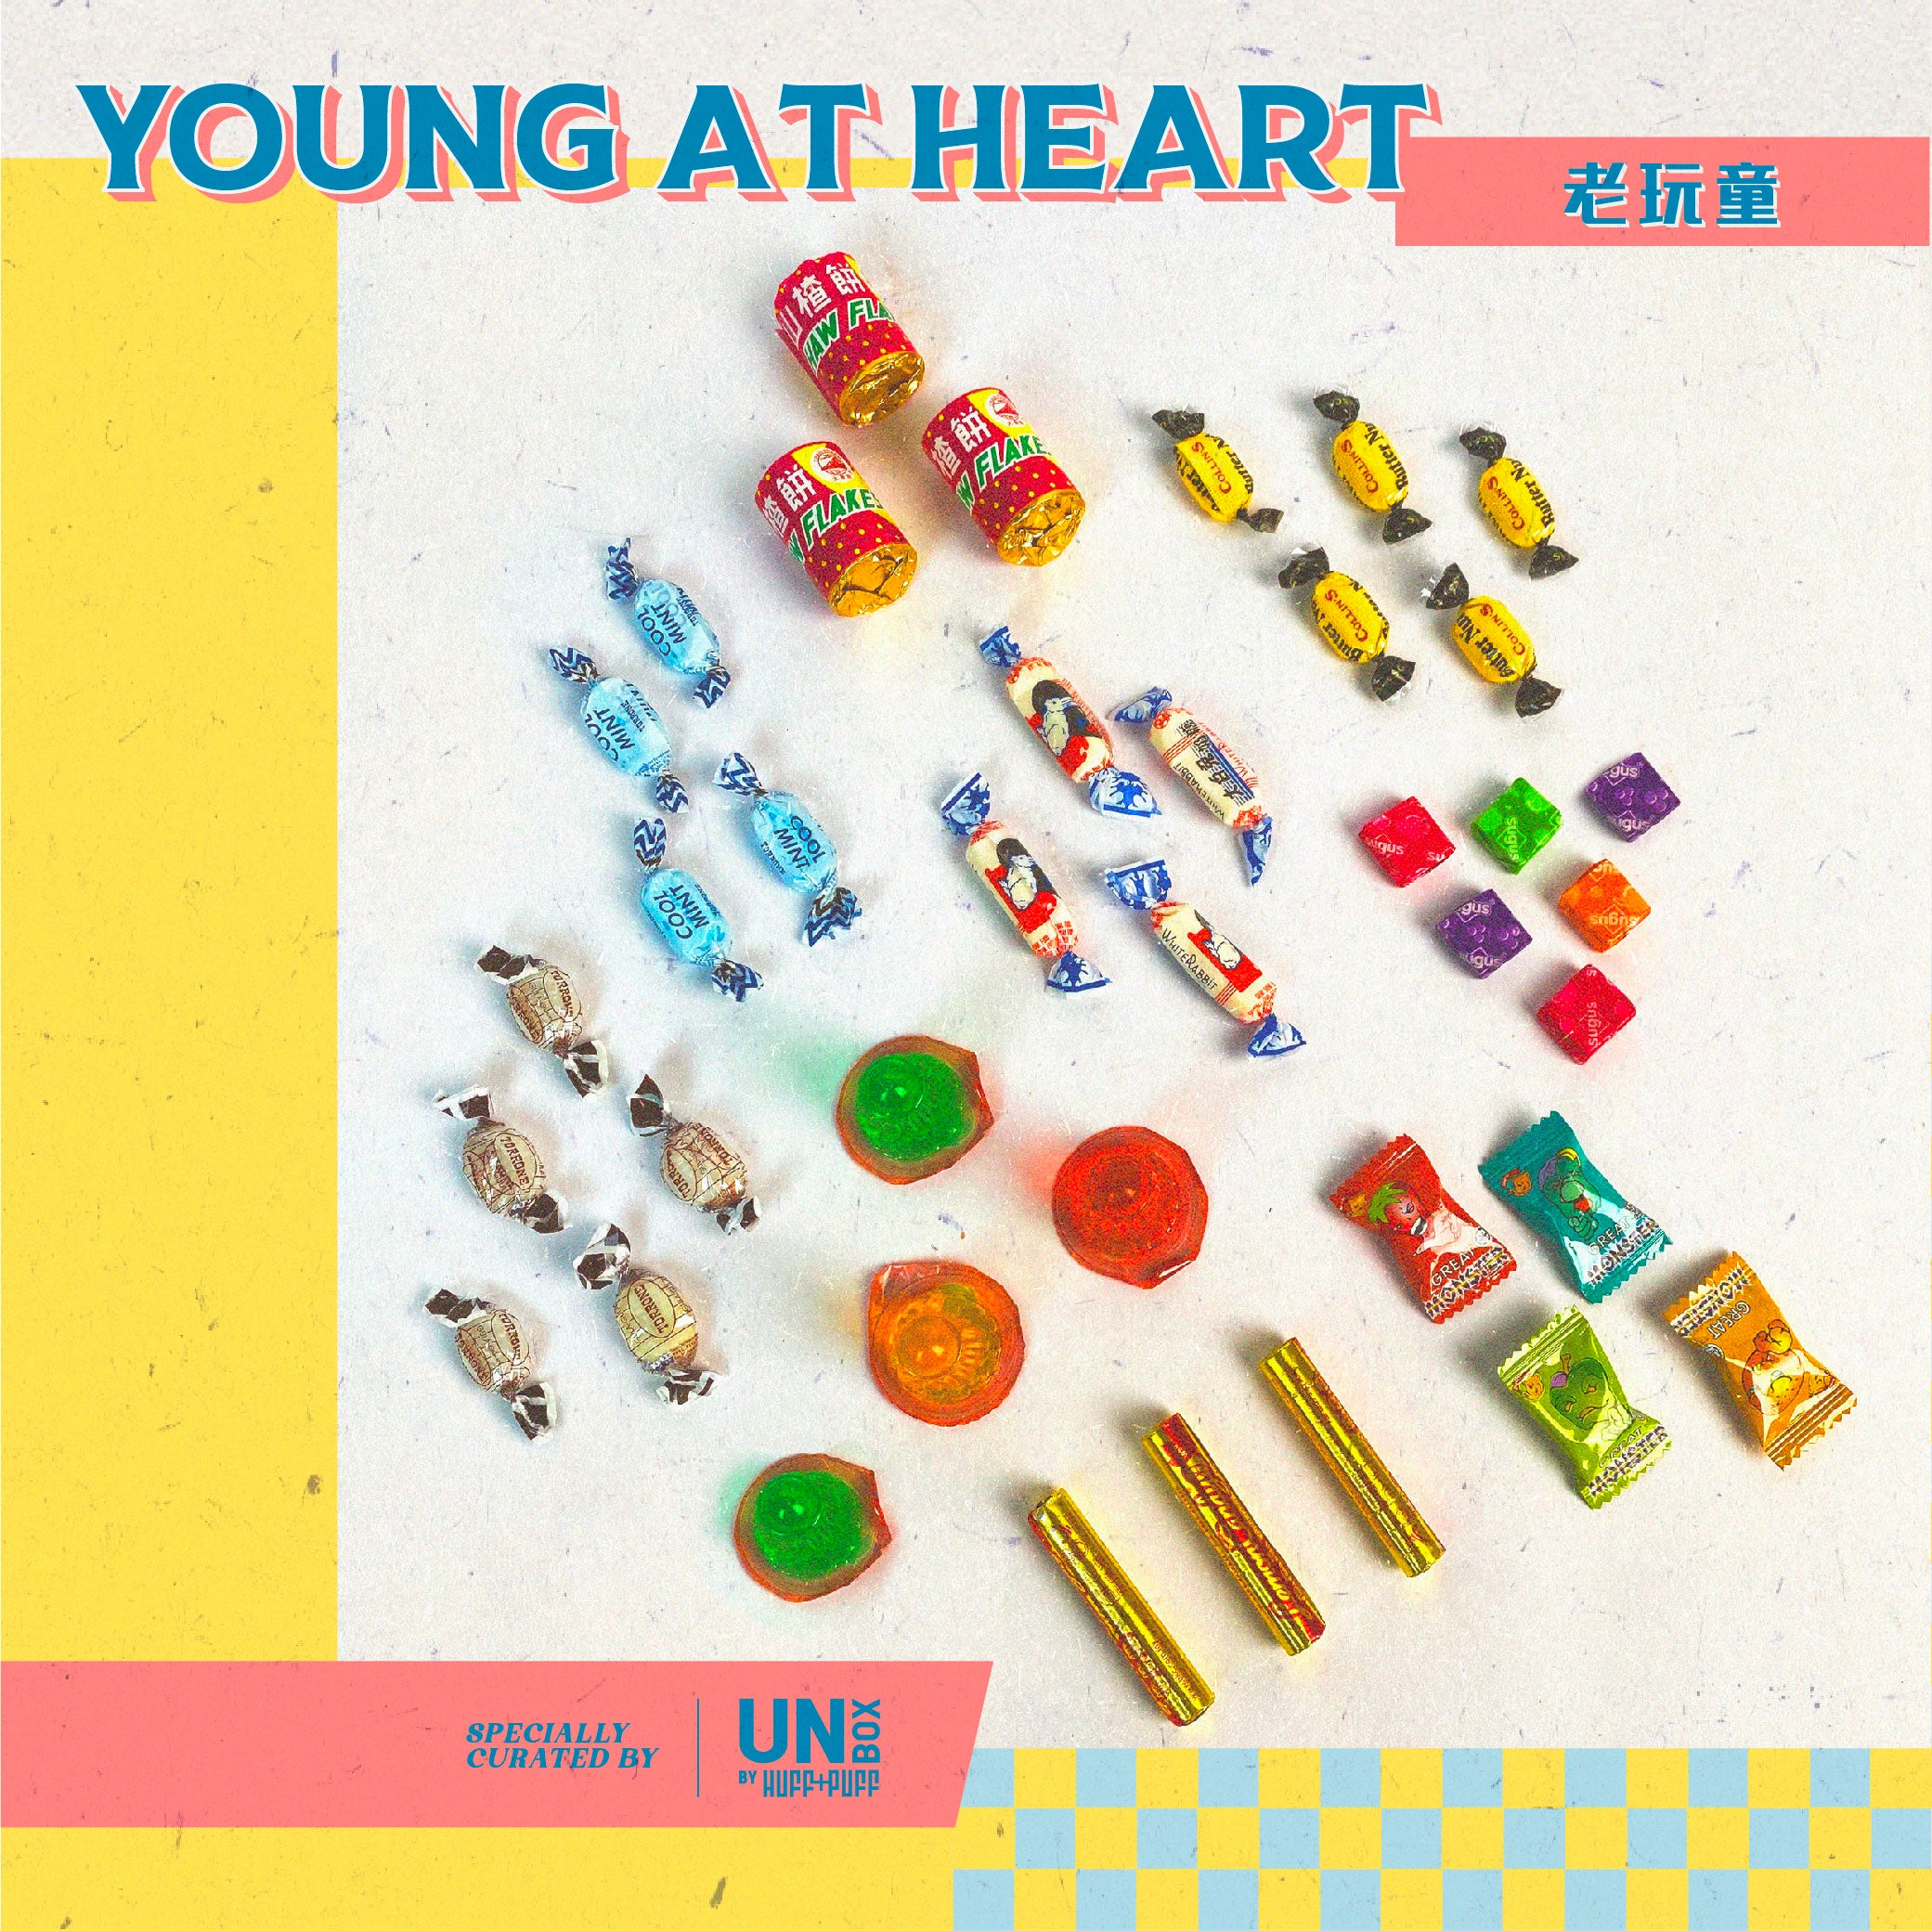 YOUNG AT HEART 老玩童